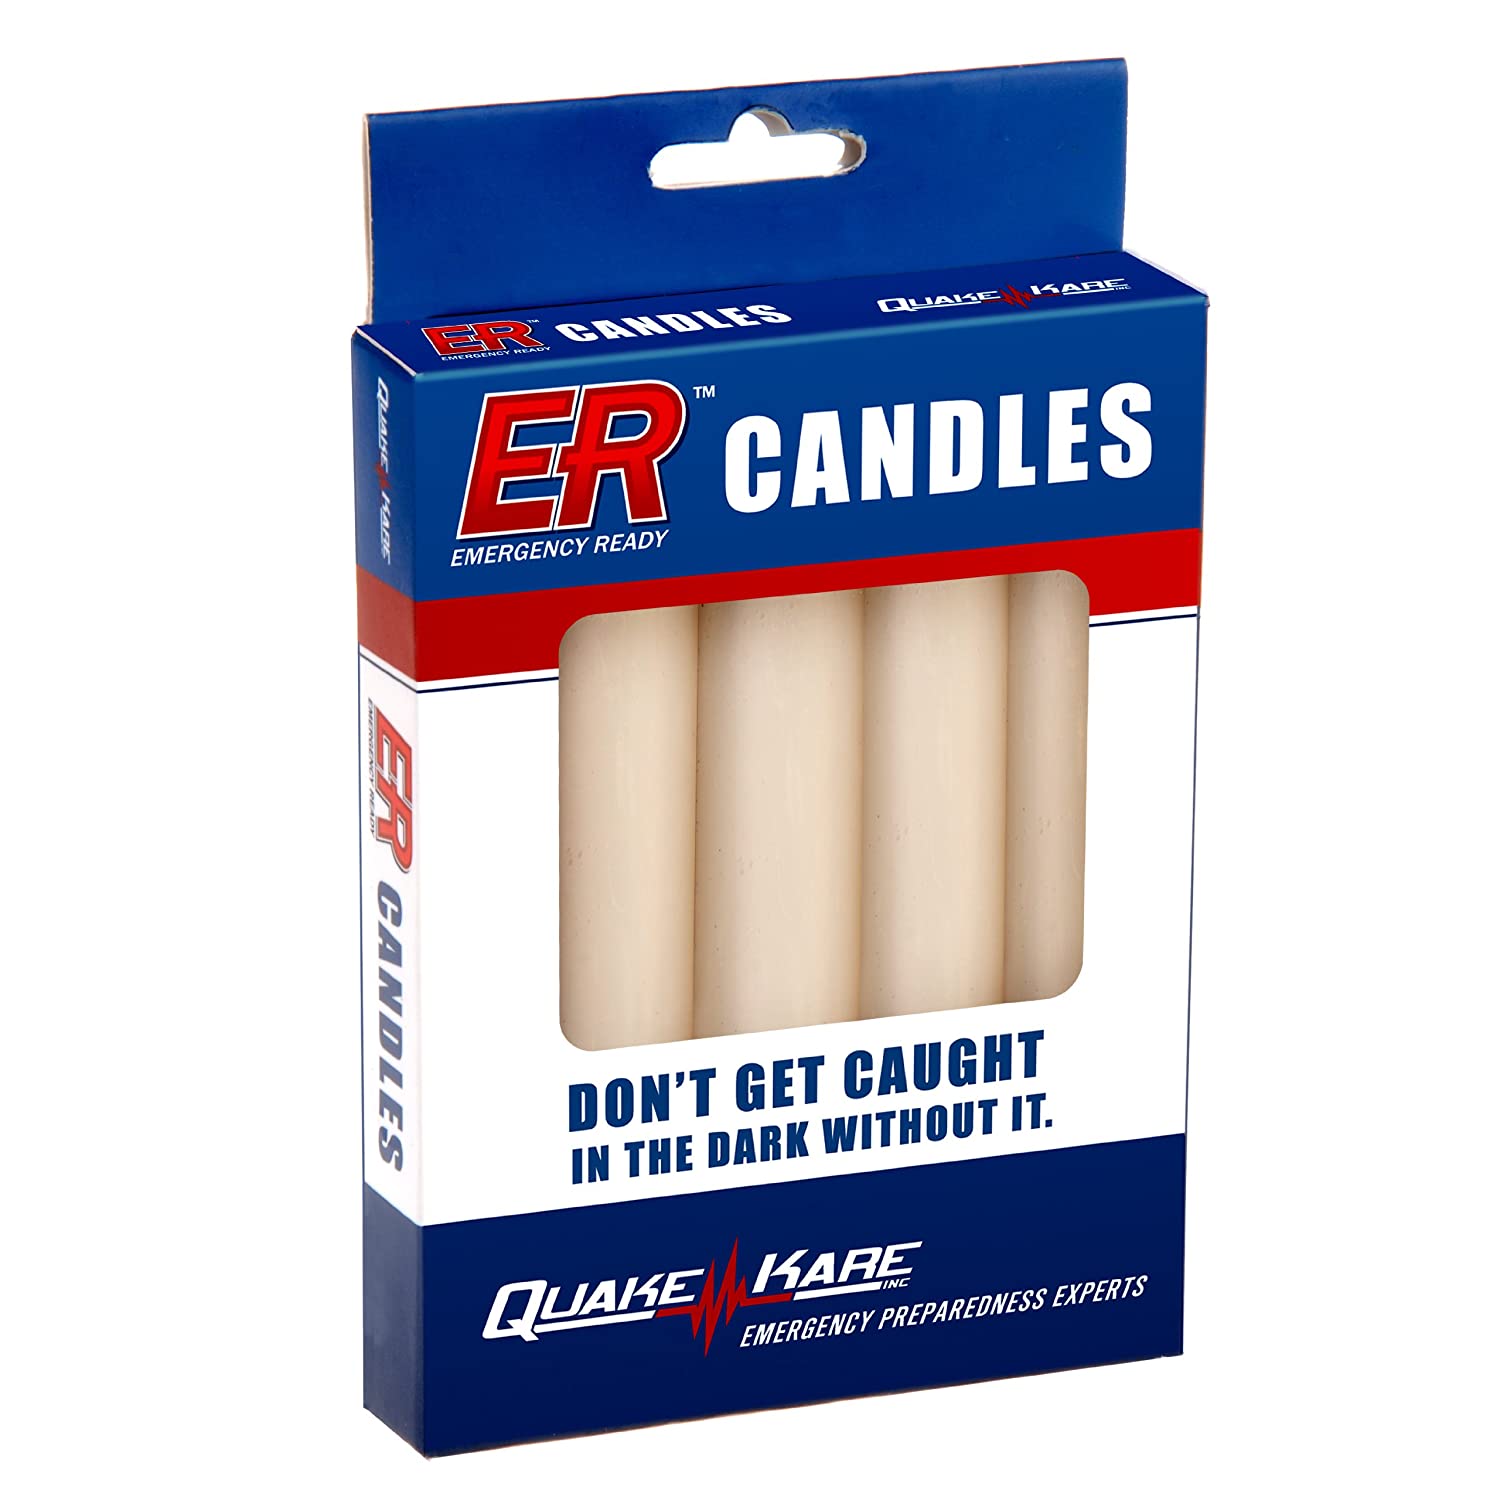 TOP-16 Emergency Candles - Editor's Choice